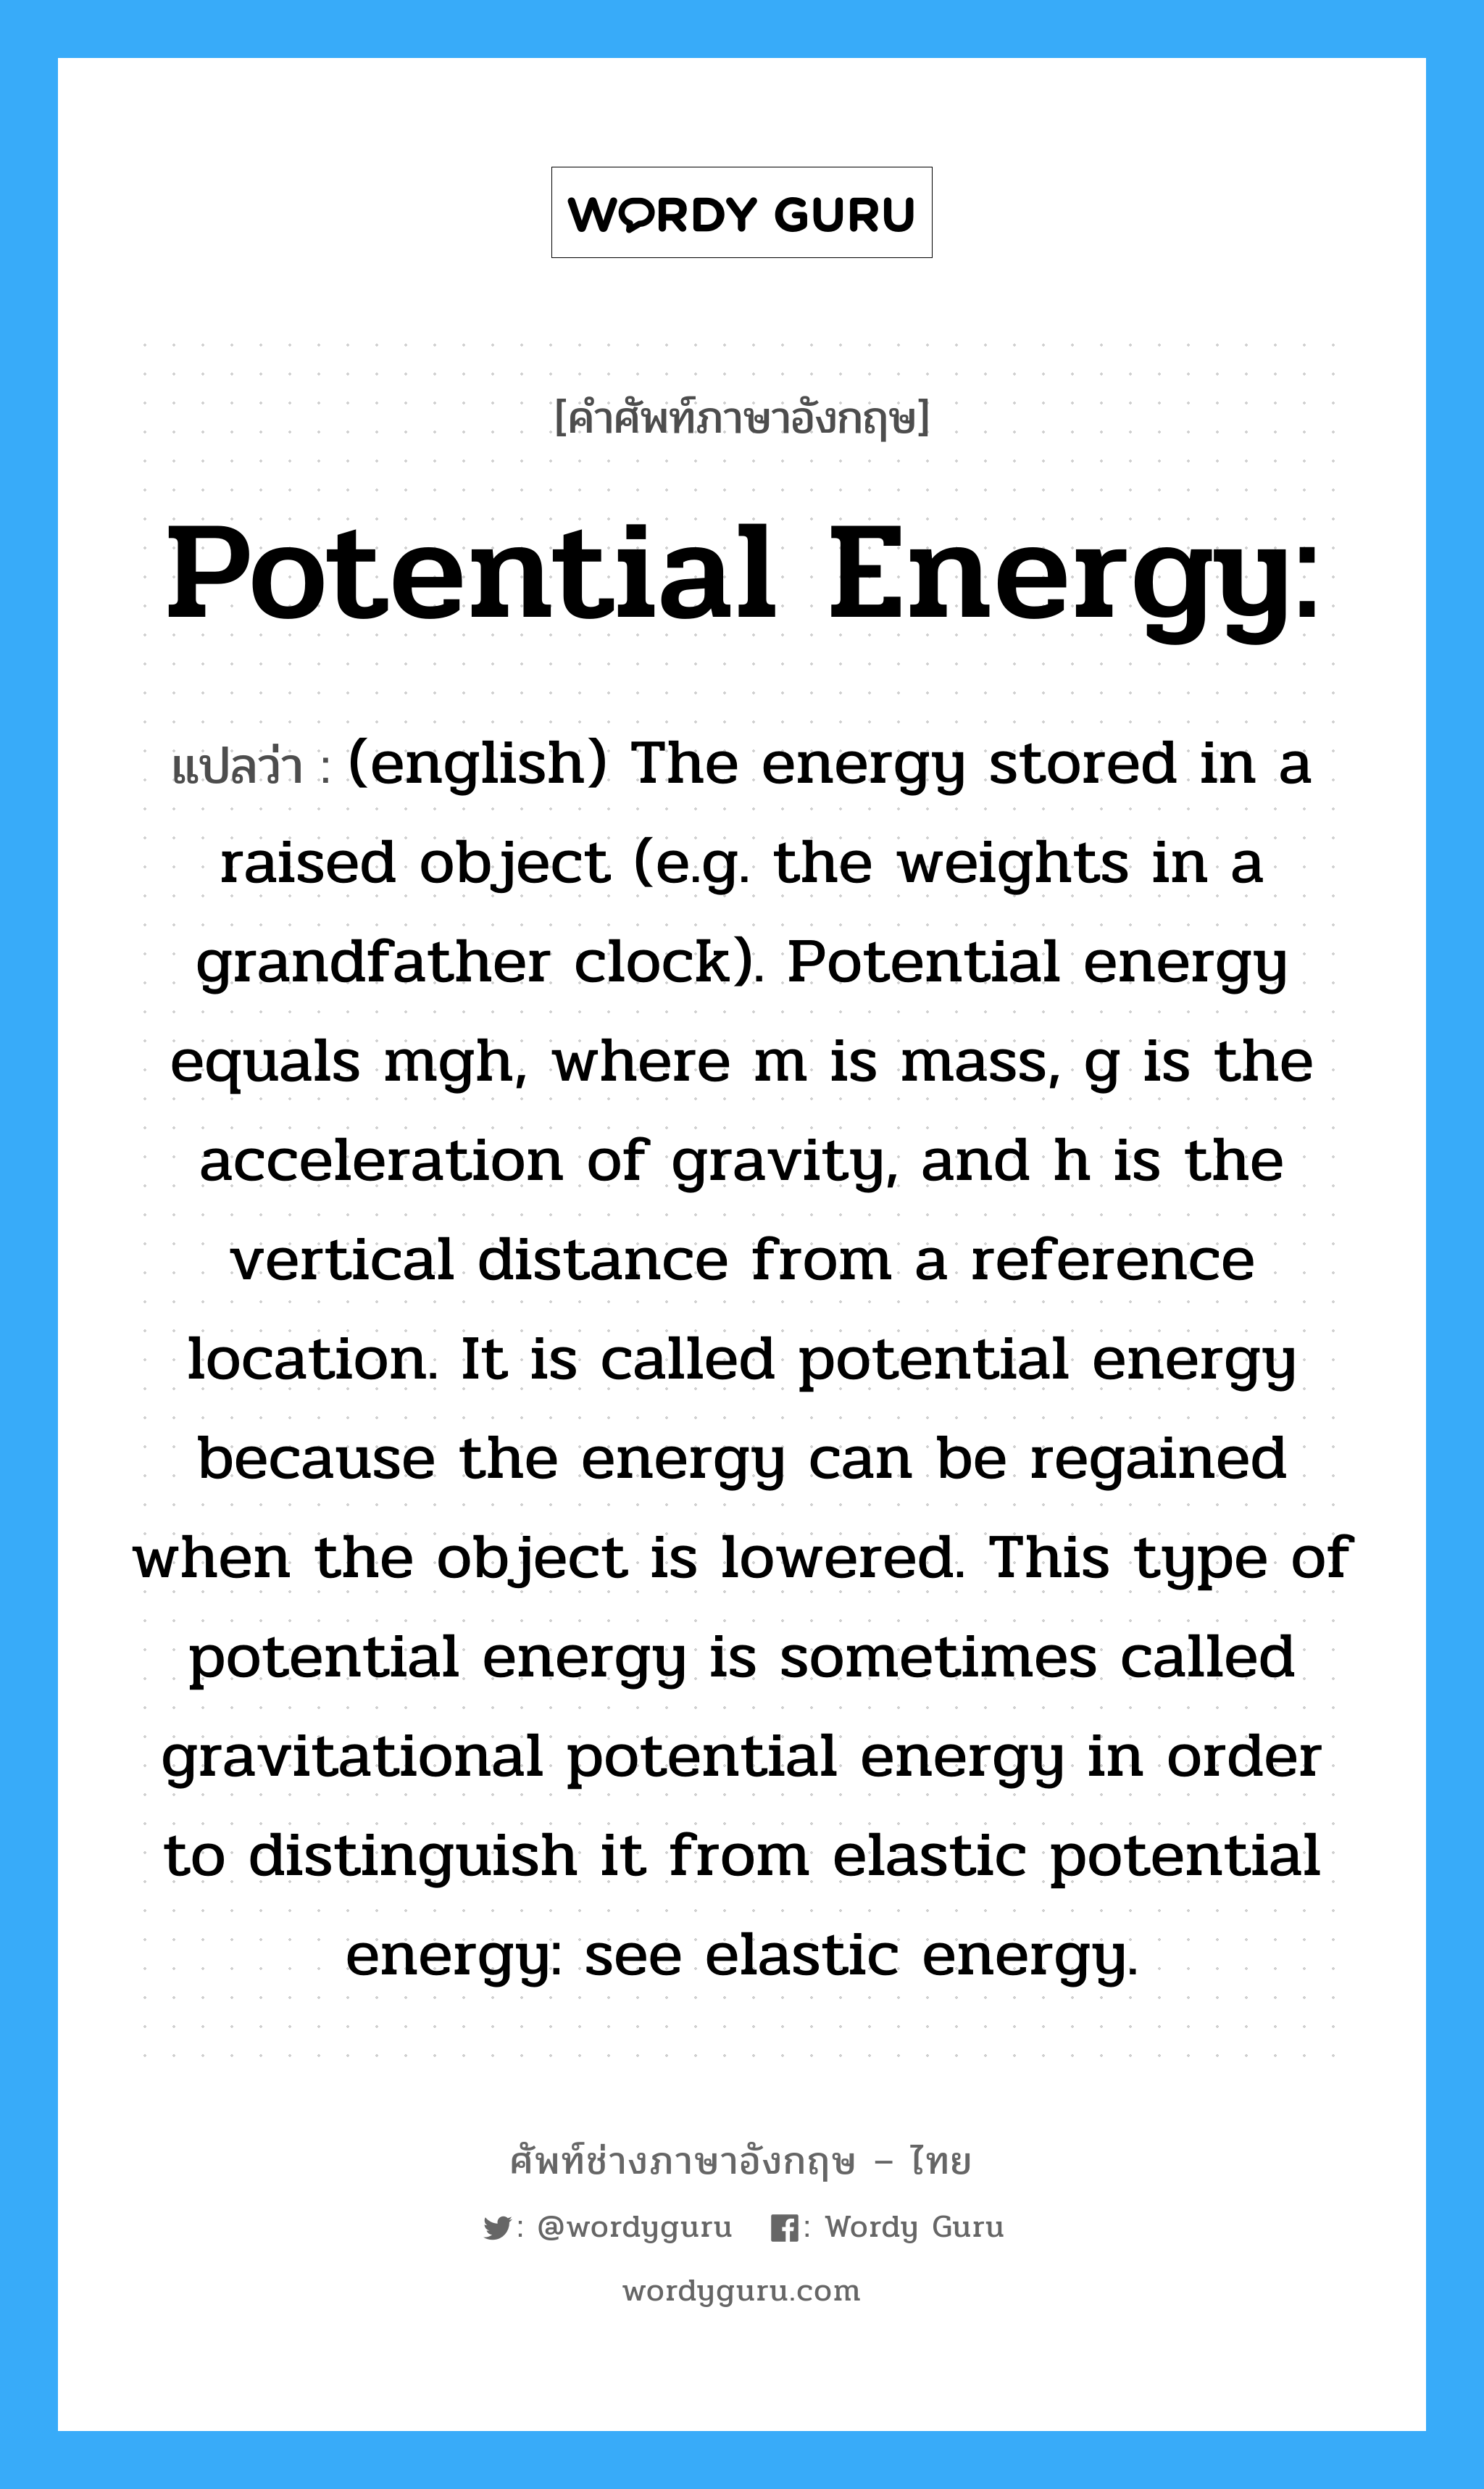 Potential Energy: แปลว่า?, คำศัพท์ช่างภาษาอังกฤษ - ไทย Potential Energy: คำศัพท์ภาษาอังกฤษ Potential Energy: แปลว่า (english) The energy stored in a raised object (e.g. the weights in a grandfather clock). Potential energy equals mgh, where m is mass, g is the acceleration of gravity, and h is the vertical distance from a reference location. It is called potential energy because the energy can be regained when the object is lowered. This type of potential energy is sometimes called gravitational potential energy in order to distinguish it from elastic potential energy: see elastic energy.